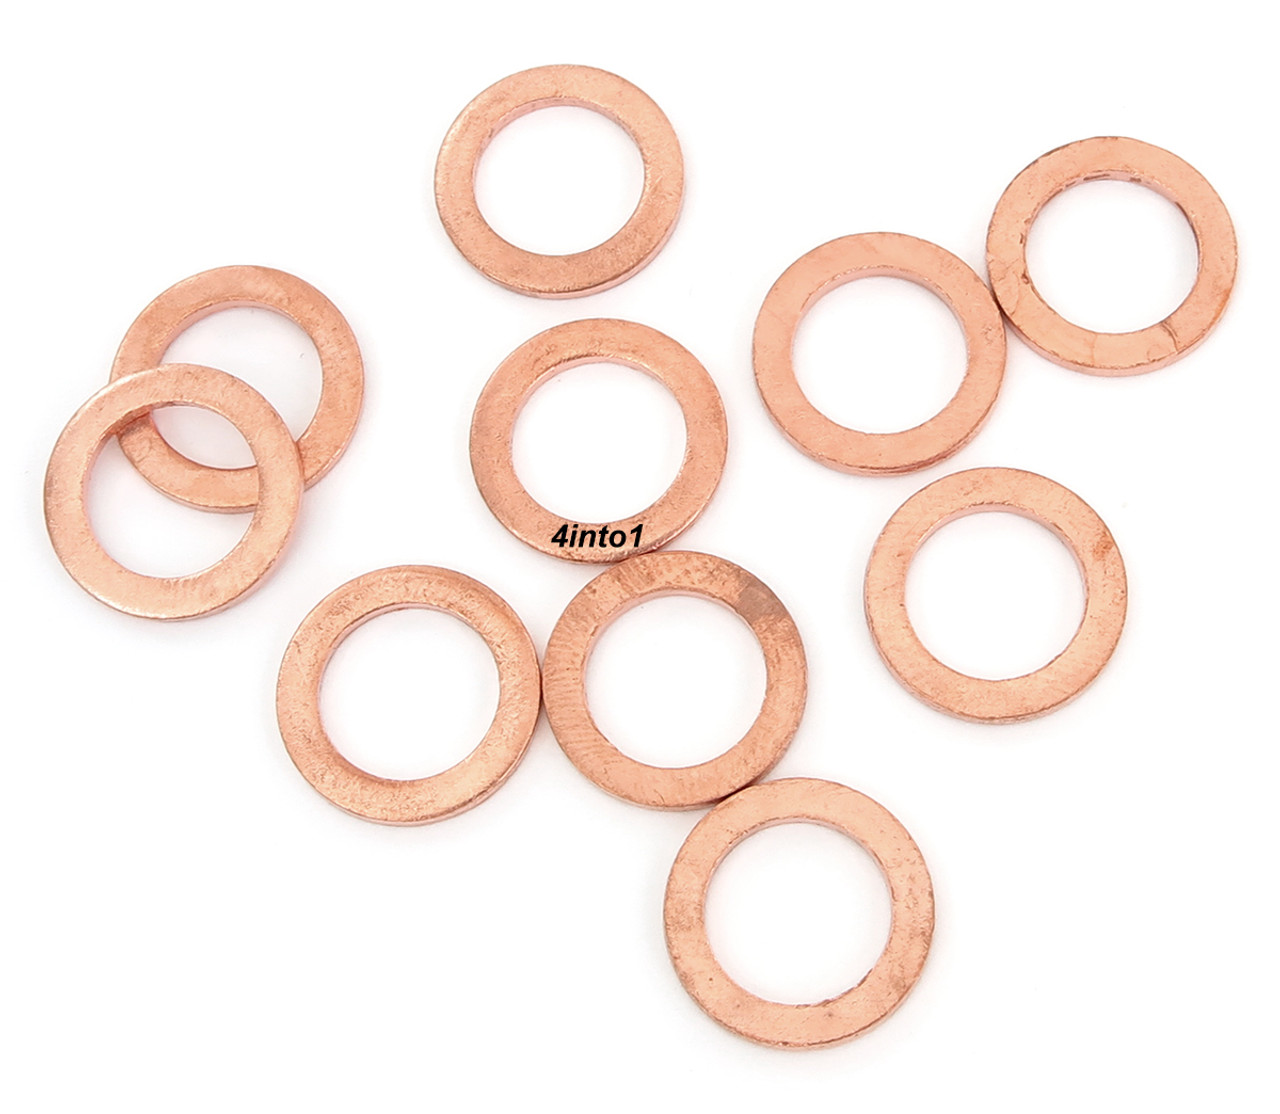 Box of 140 Assorted Solid Metric Copper Washers 6mm 24mm Sump Oil Brakes